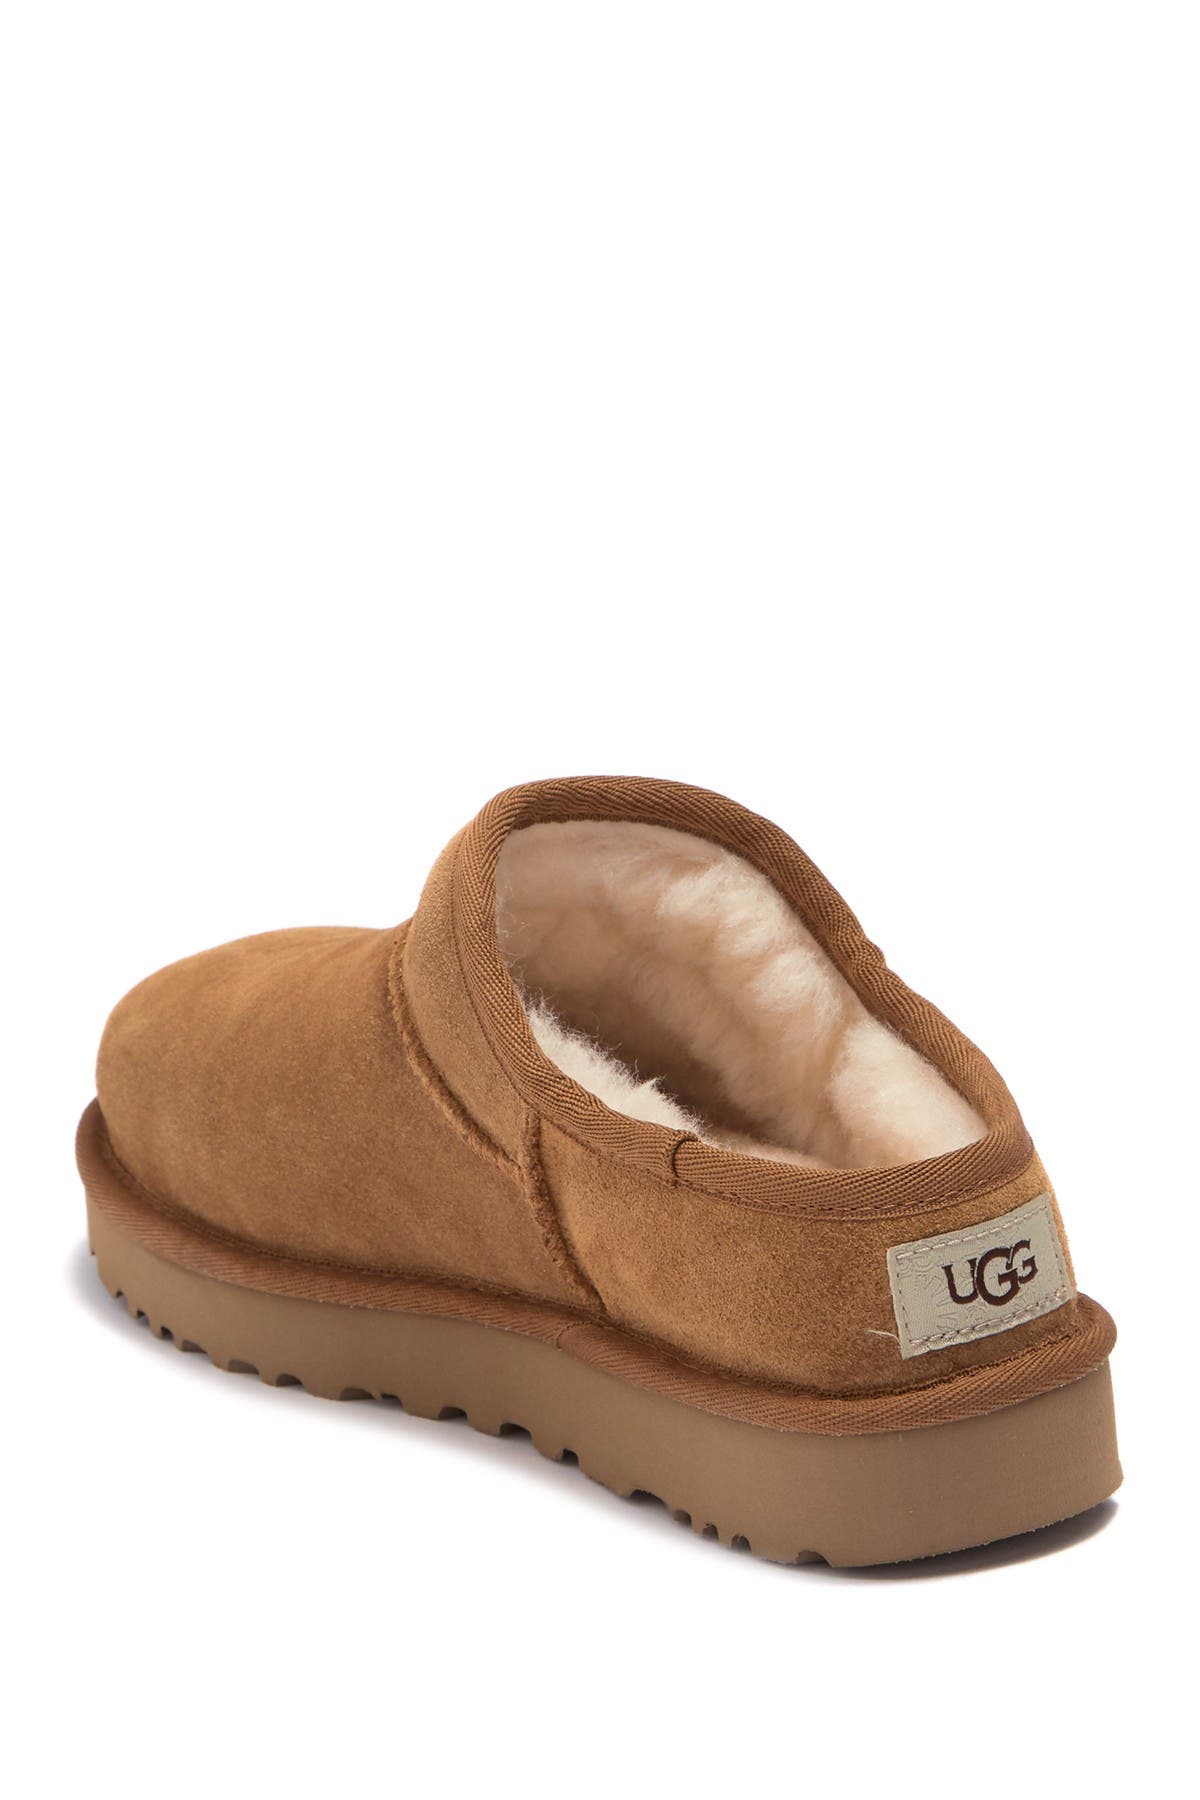 uggs slippers sale